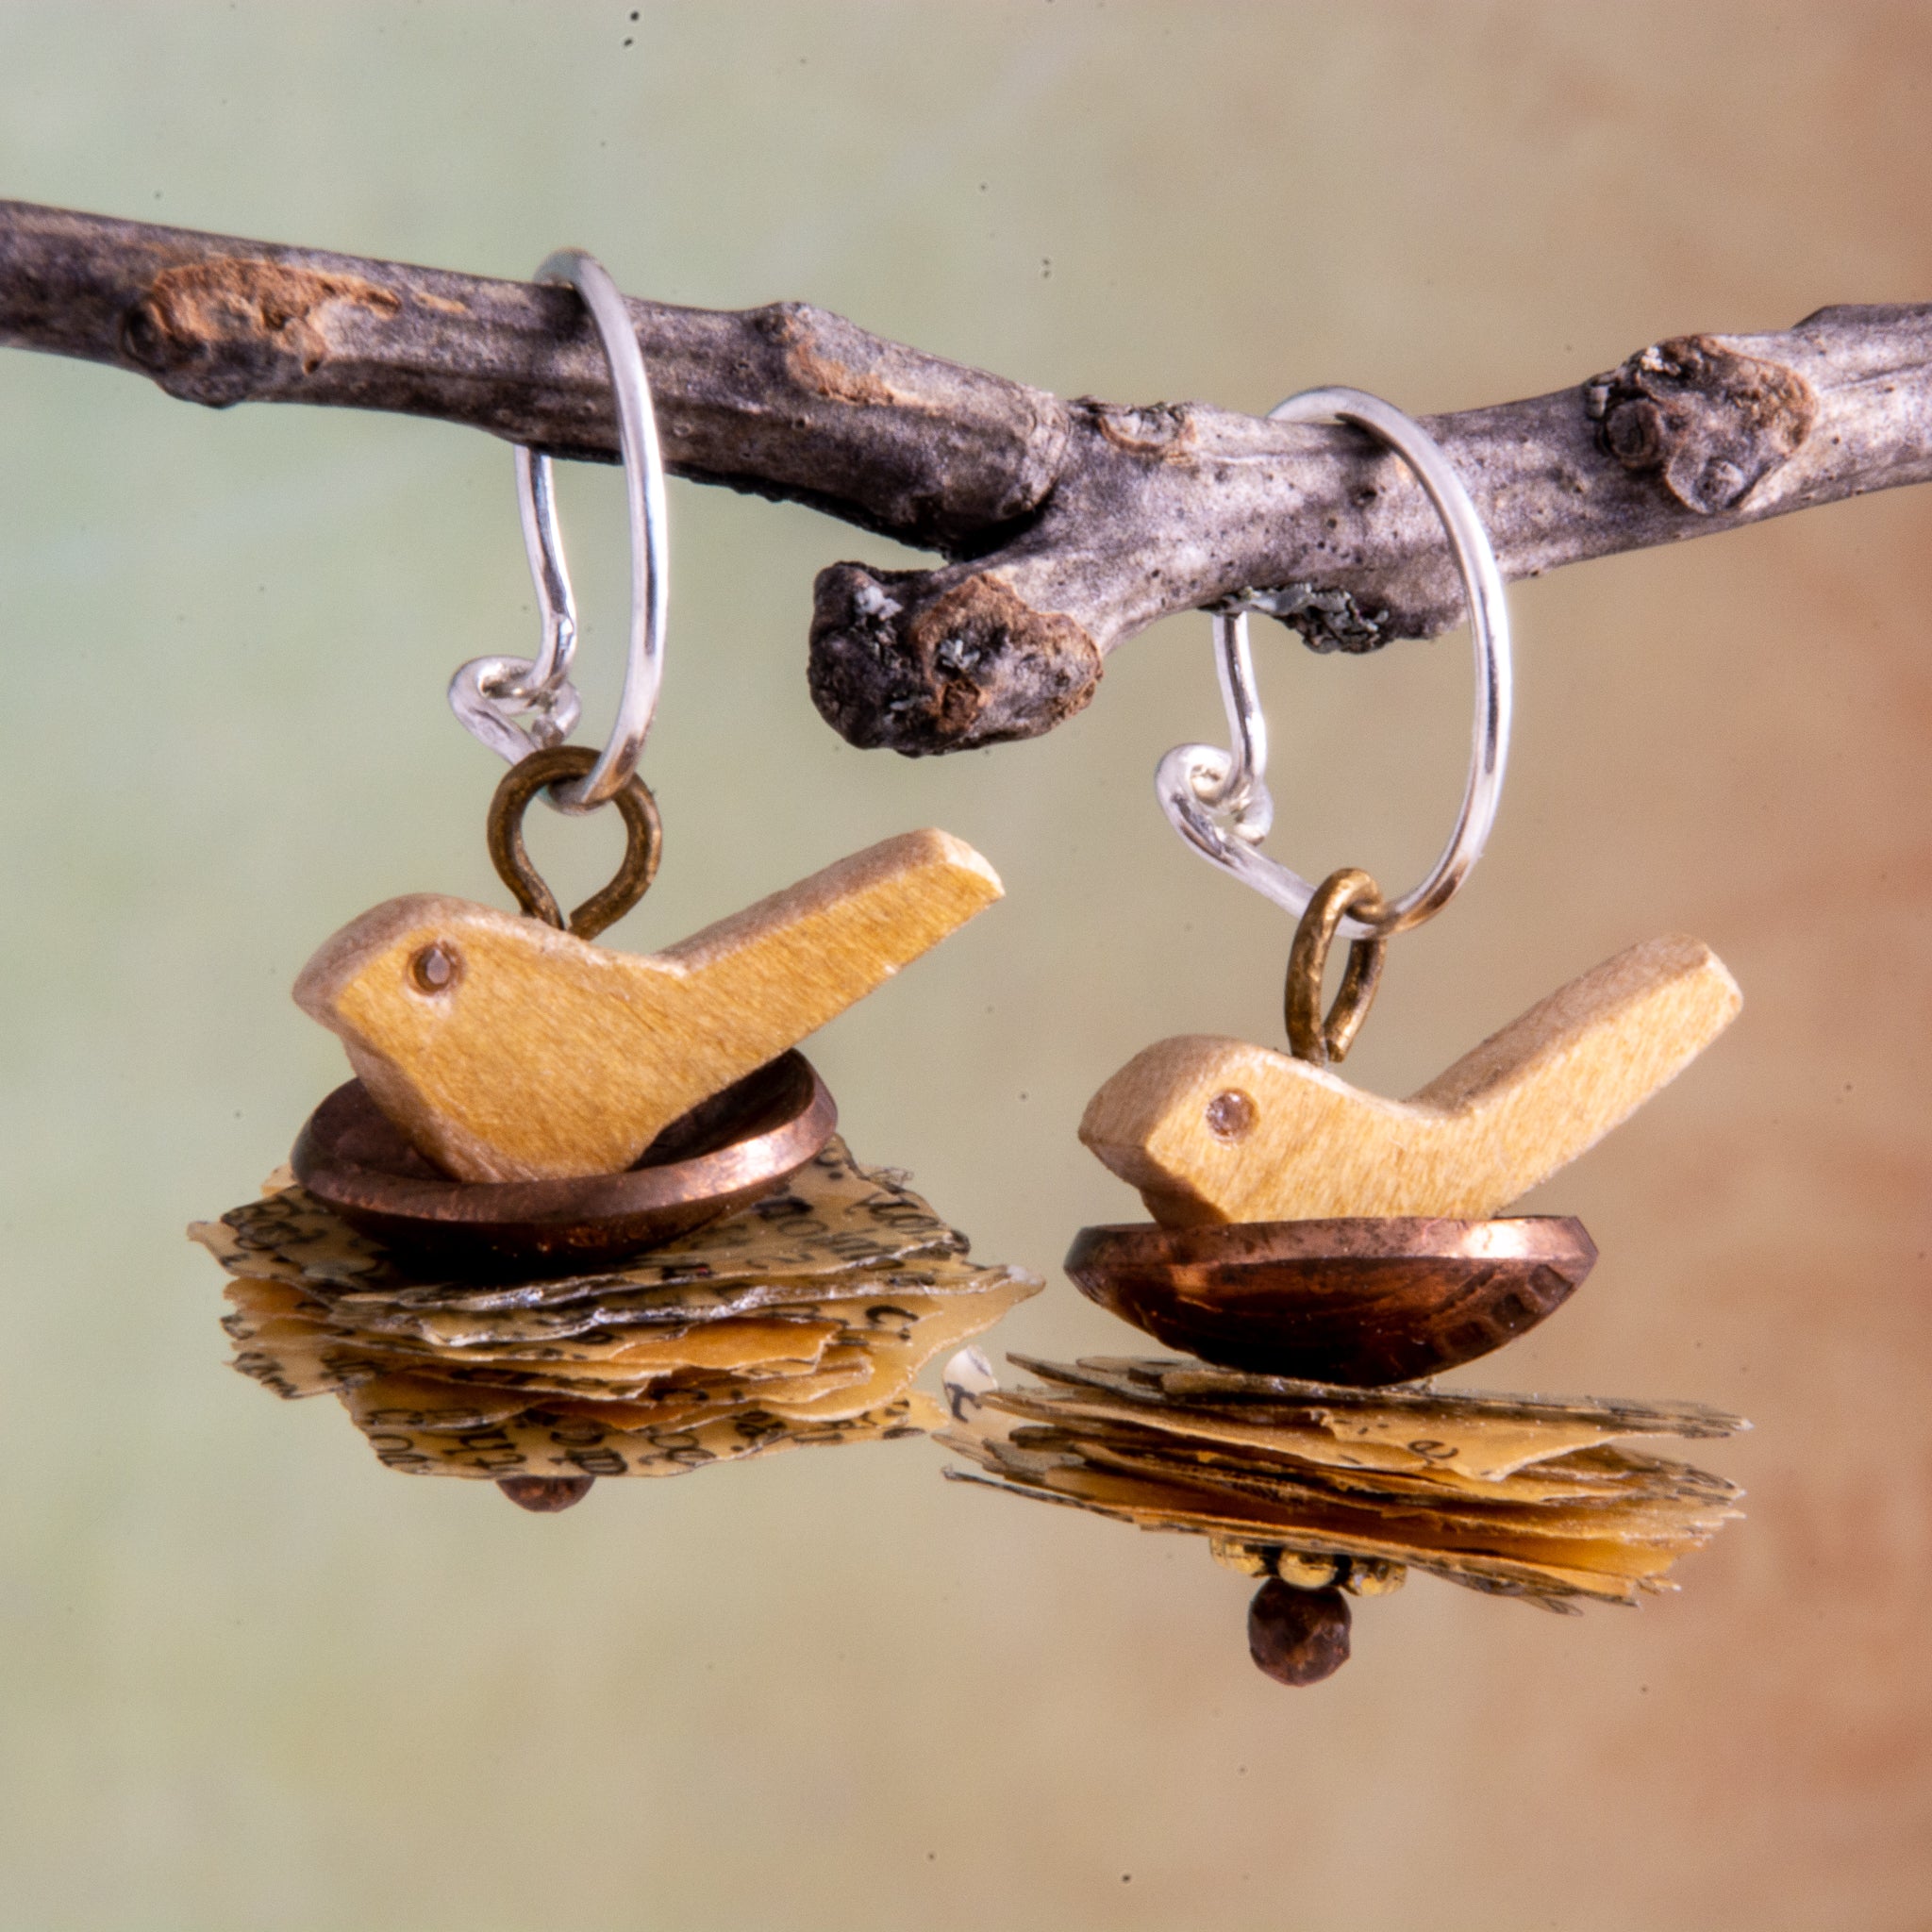 A penny for the thoughts of the mama birds as they sit in their nests of these handmade earrings.   Perhaps they are thinking of love, hope and joy which is symbolized by their White Topaz eyes.